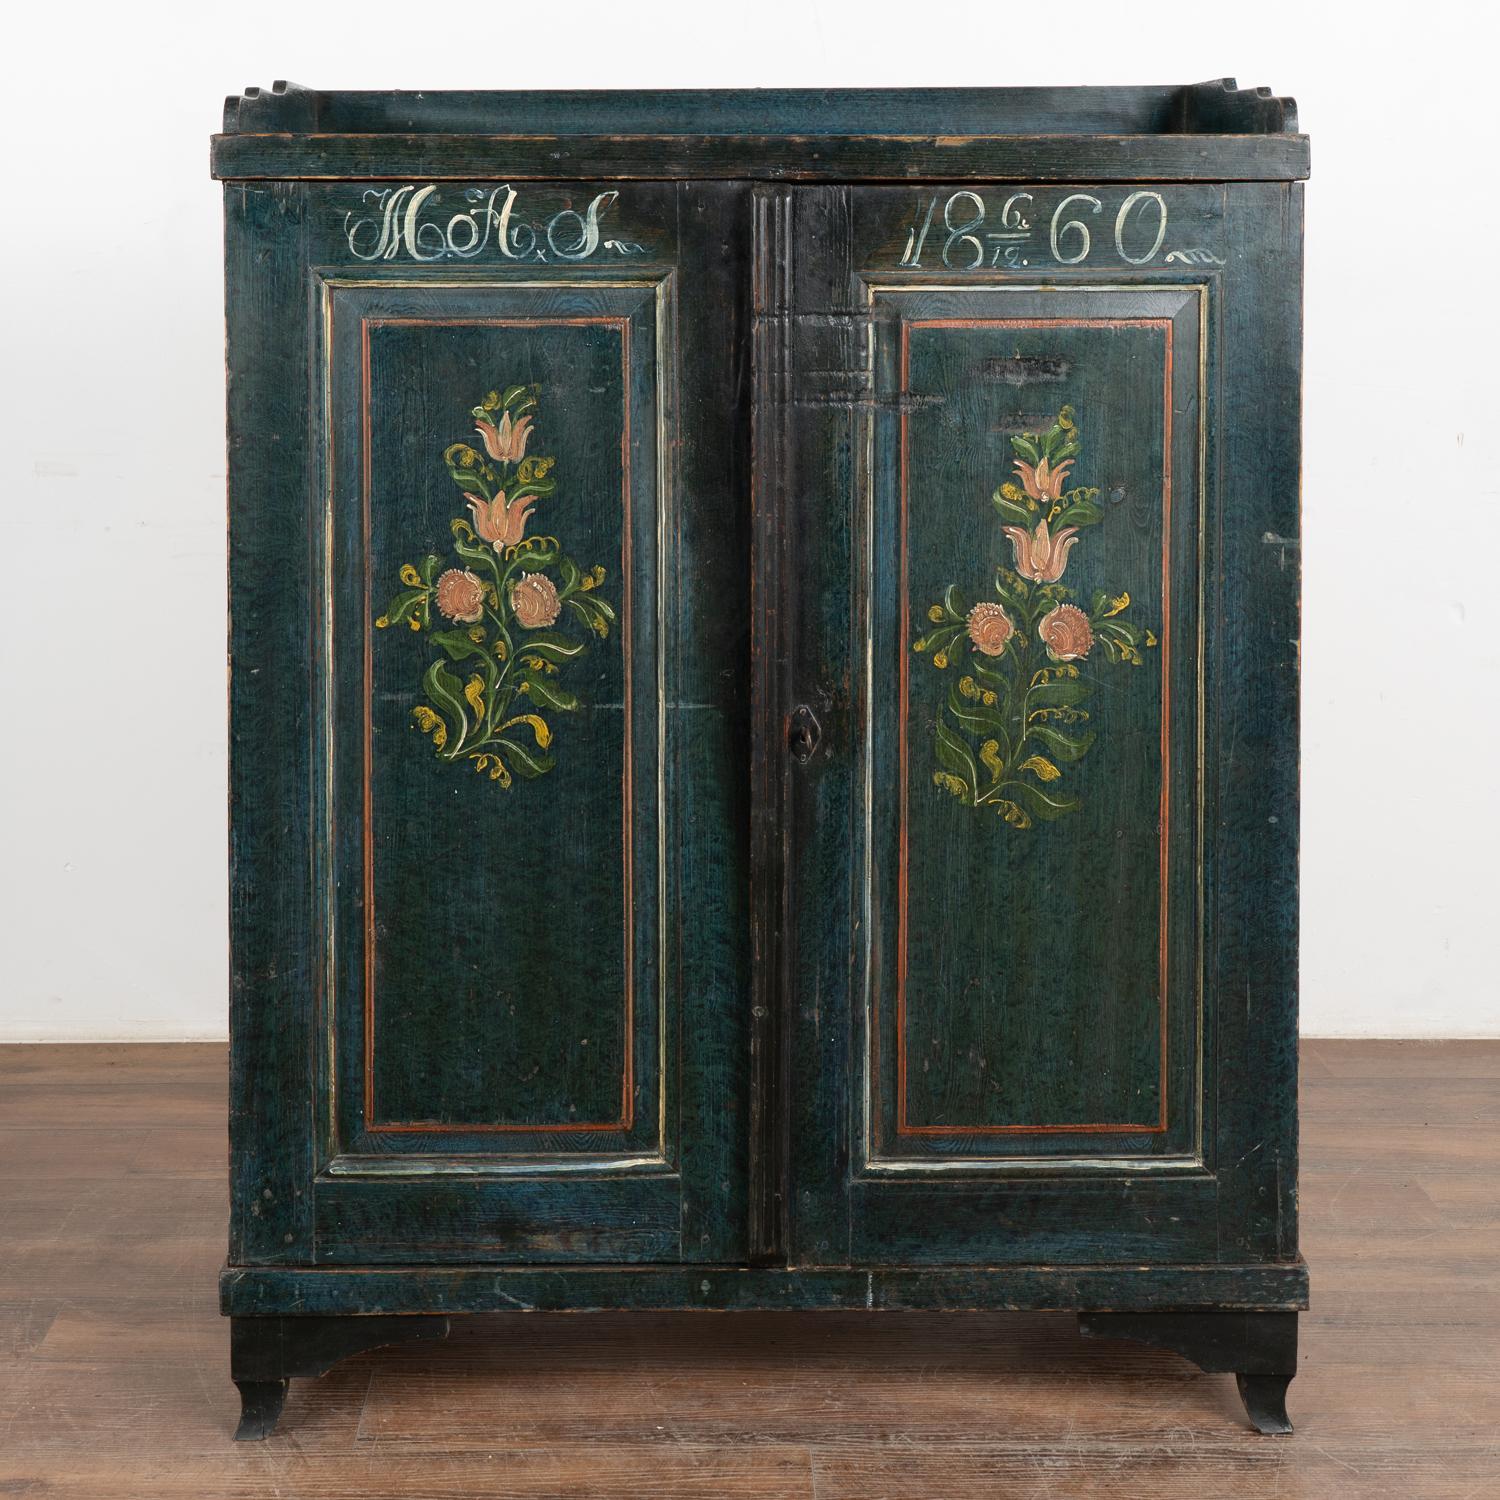 Swedish Original Dark Blue Painted Sideboard With Flowers, Sweden dated 1860 For Sale